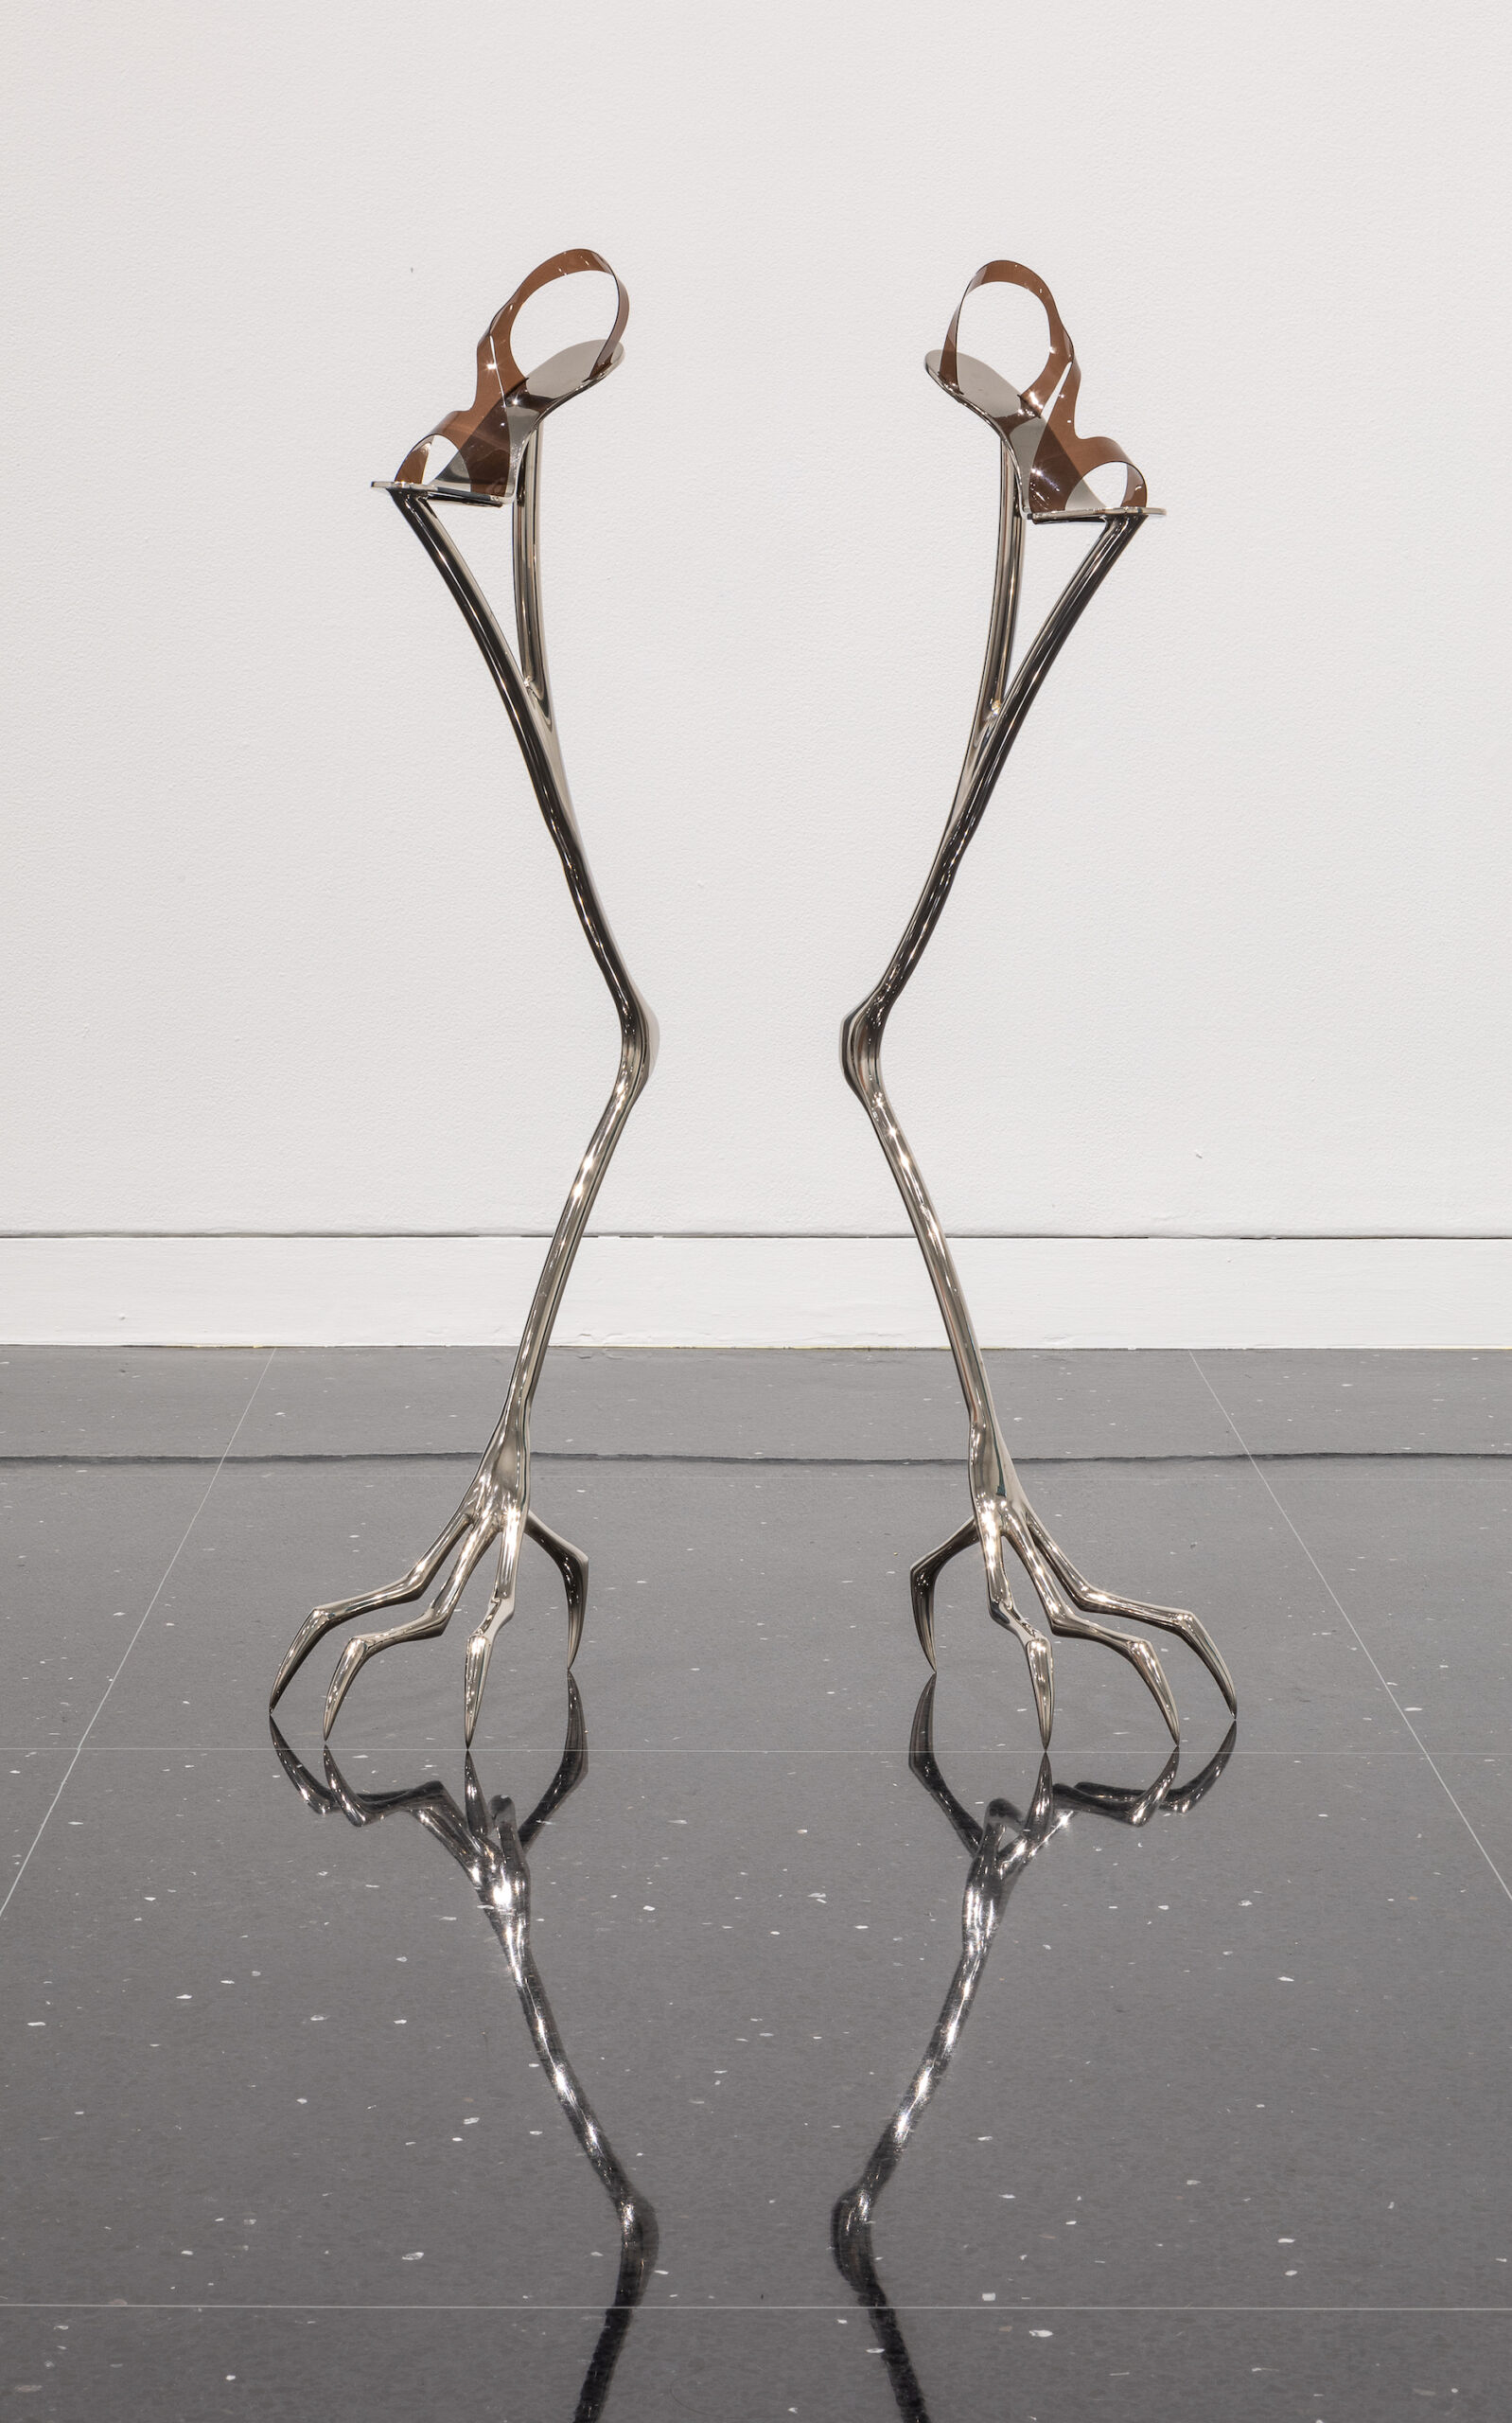 A pair of steel stilts with sandal-like foot straps and base supports resembling bird feet stands in a white gallery.